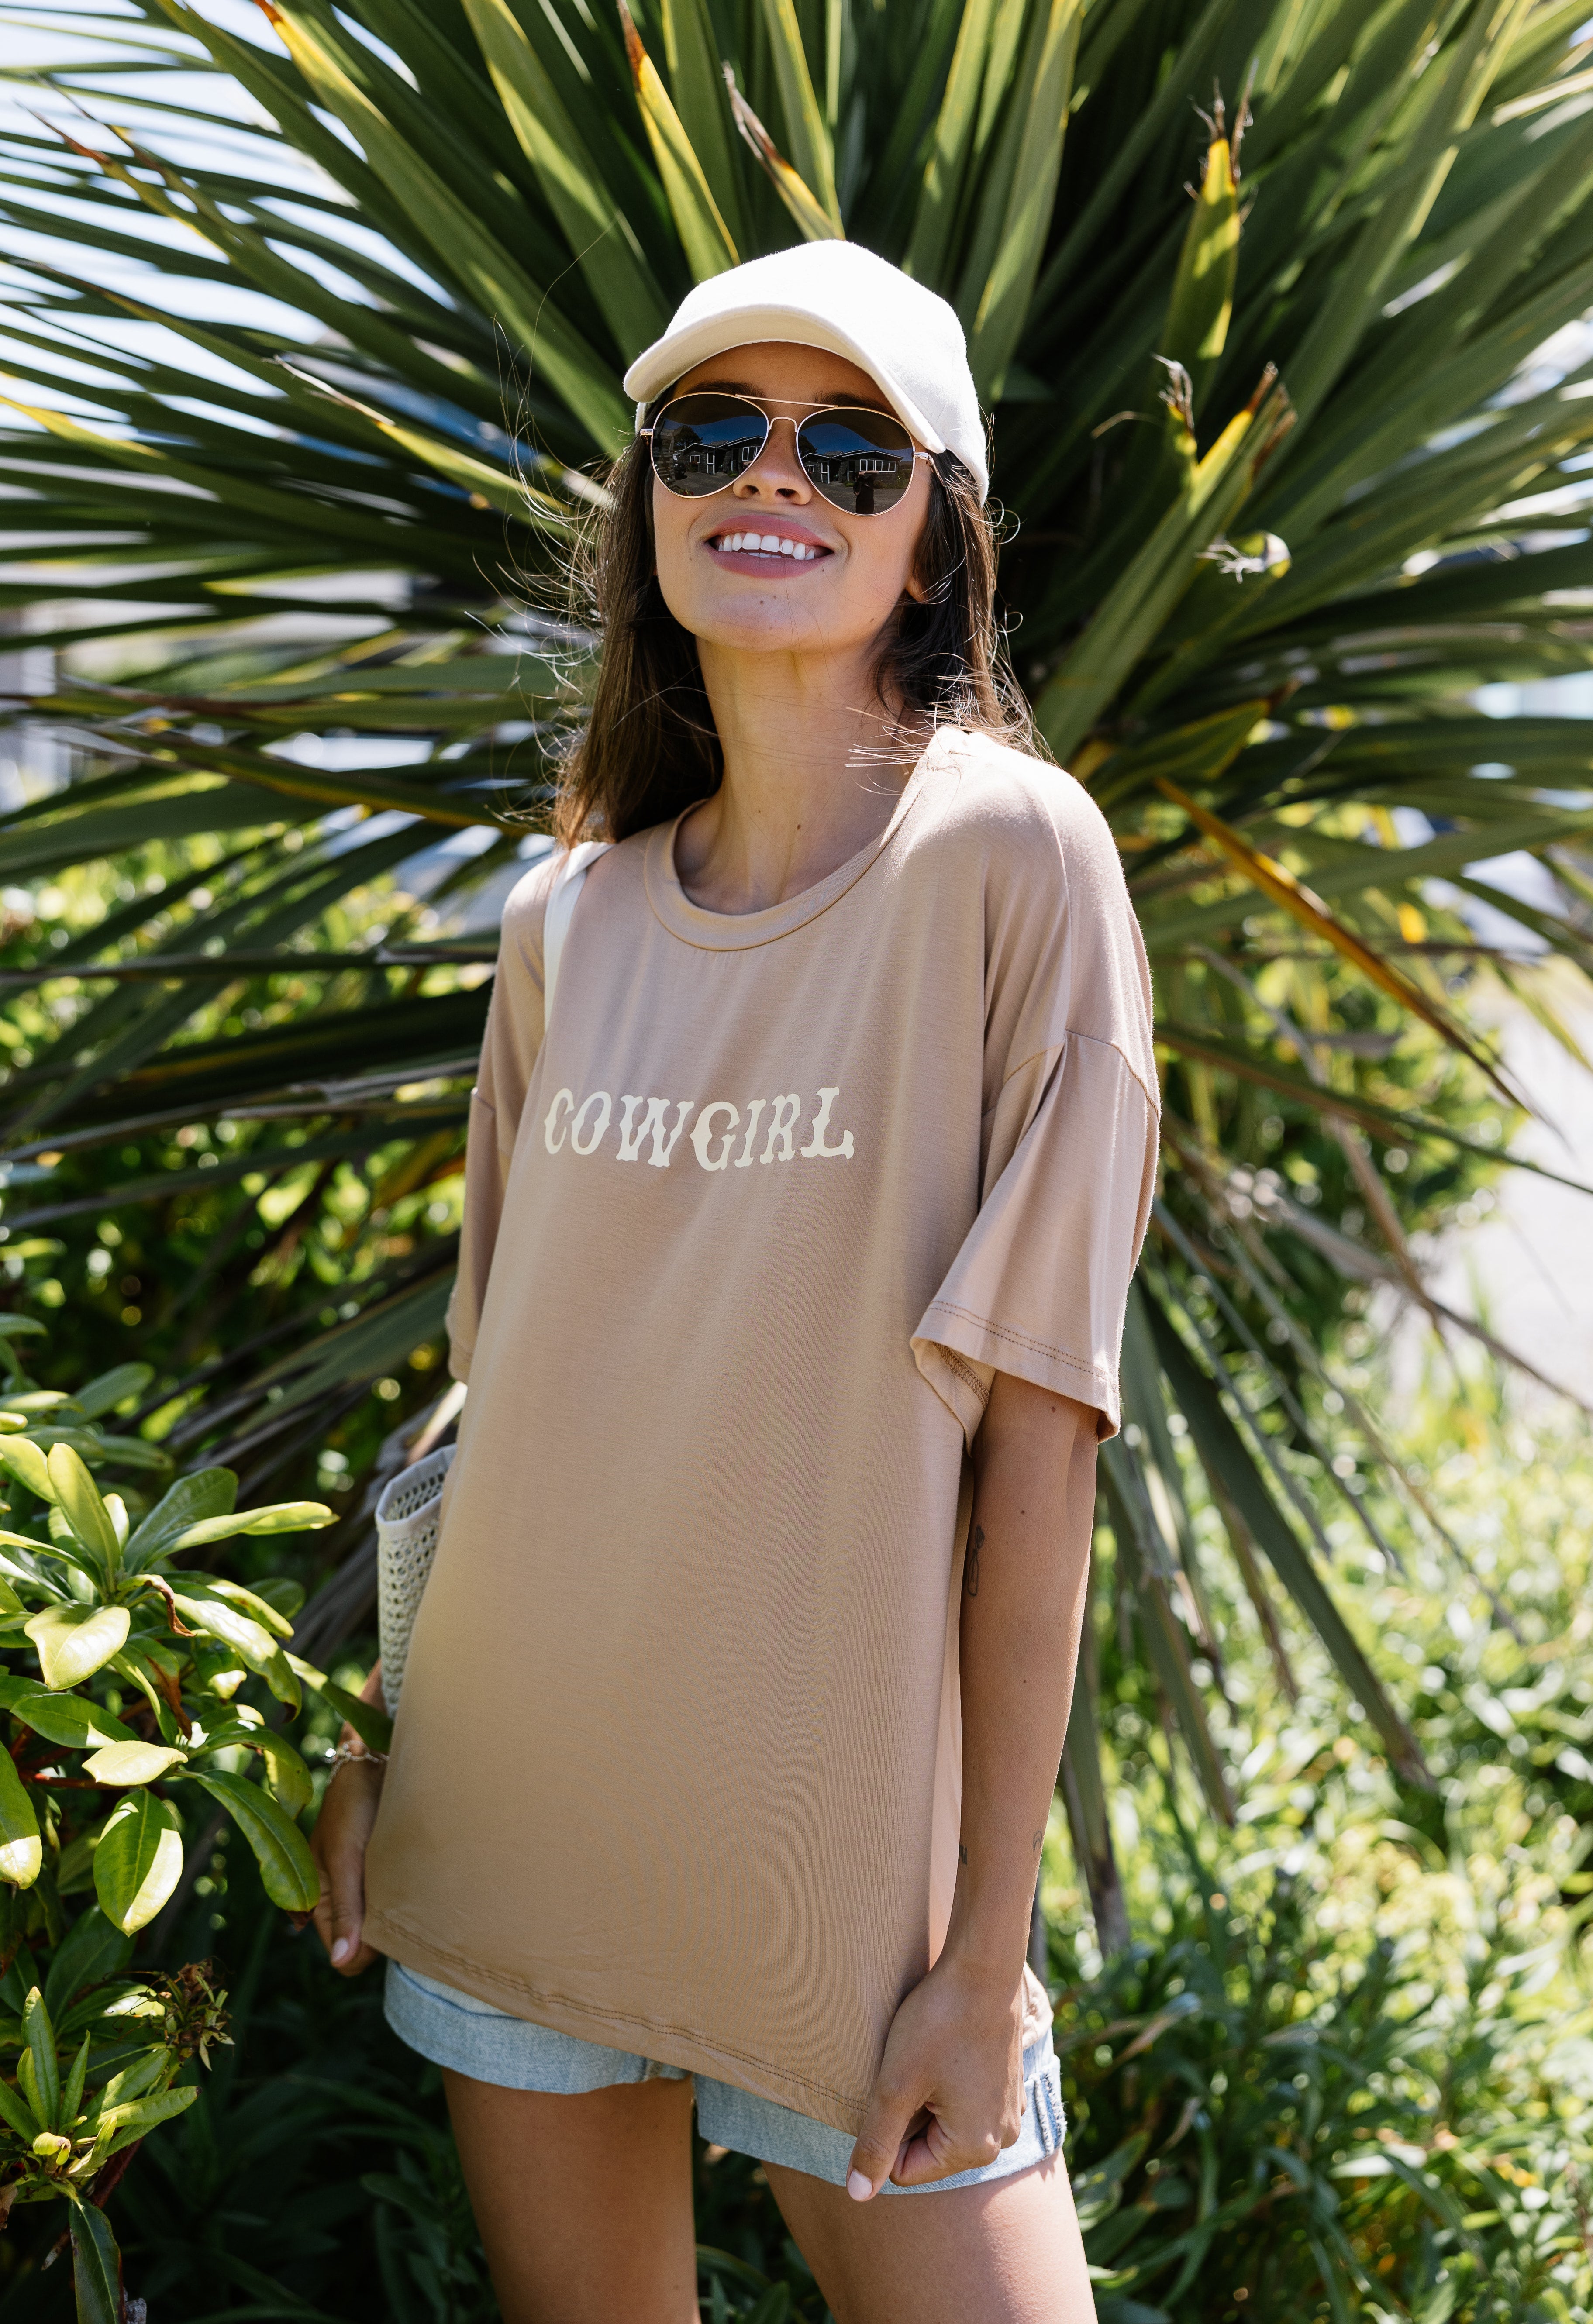 Cowgirl Tee - TAN - willows clothing S/S Shirt